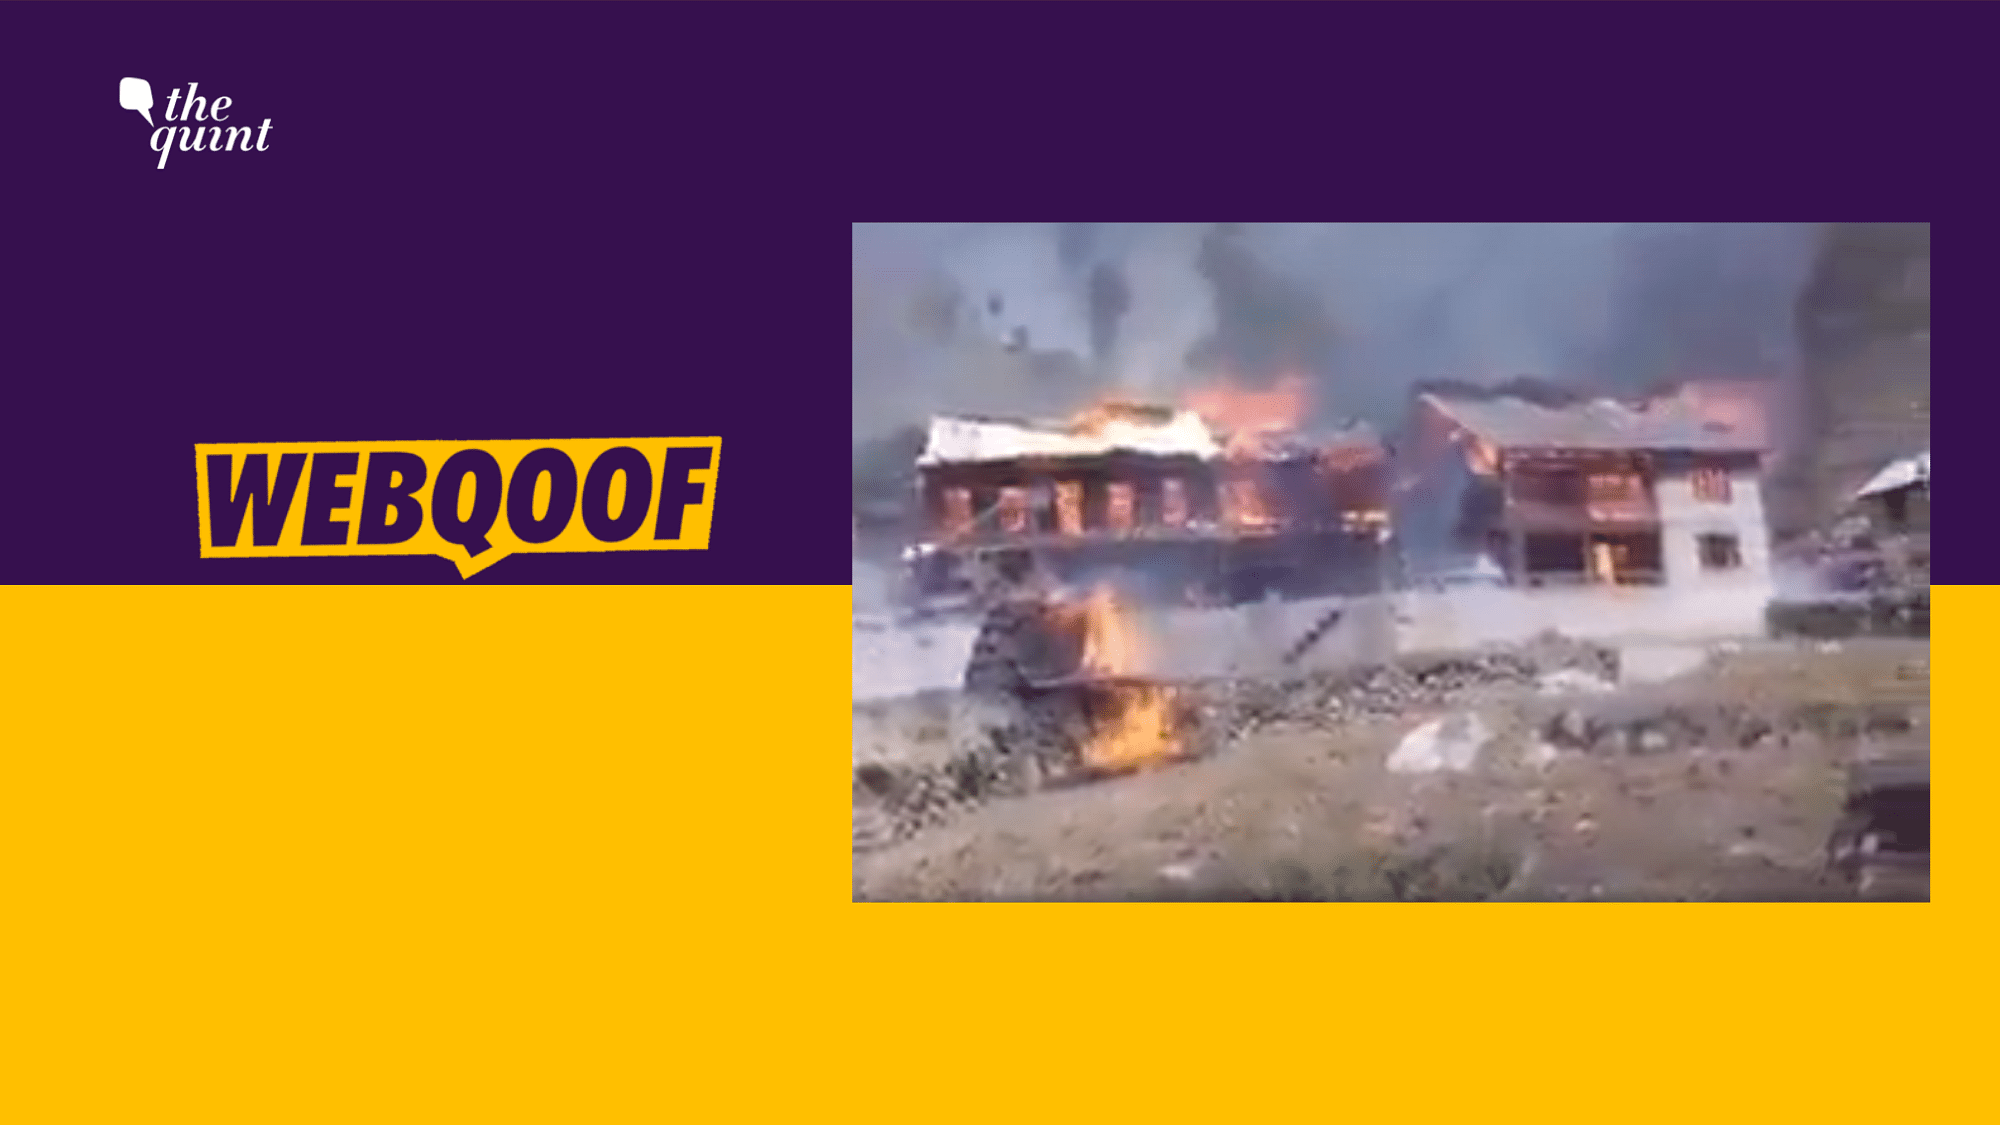 Amid the situation in Kashmir after the effective revocation of Article 370, a video on Facebook has gone viral, showing a large number of houses on fire, in what the post claims is Bandipora area of Kashmir.